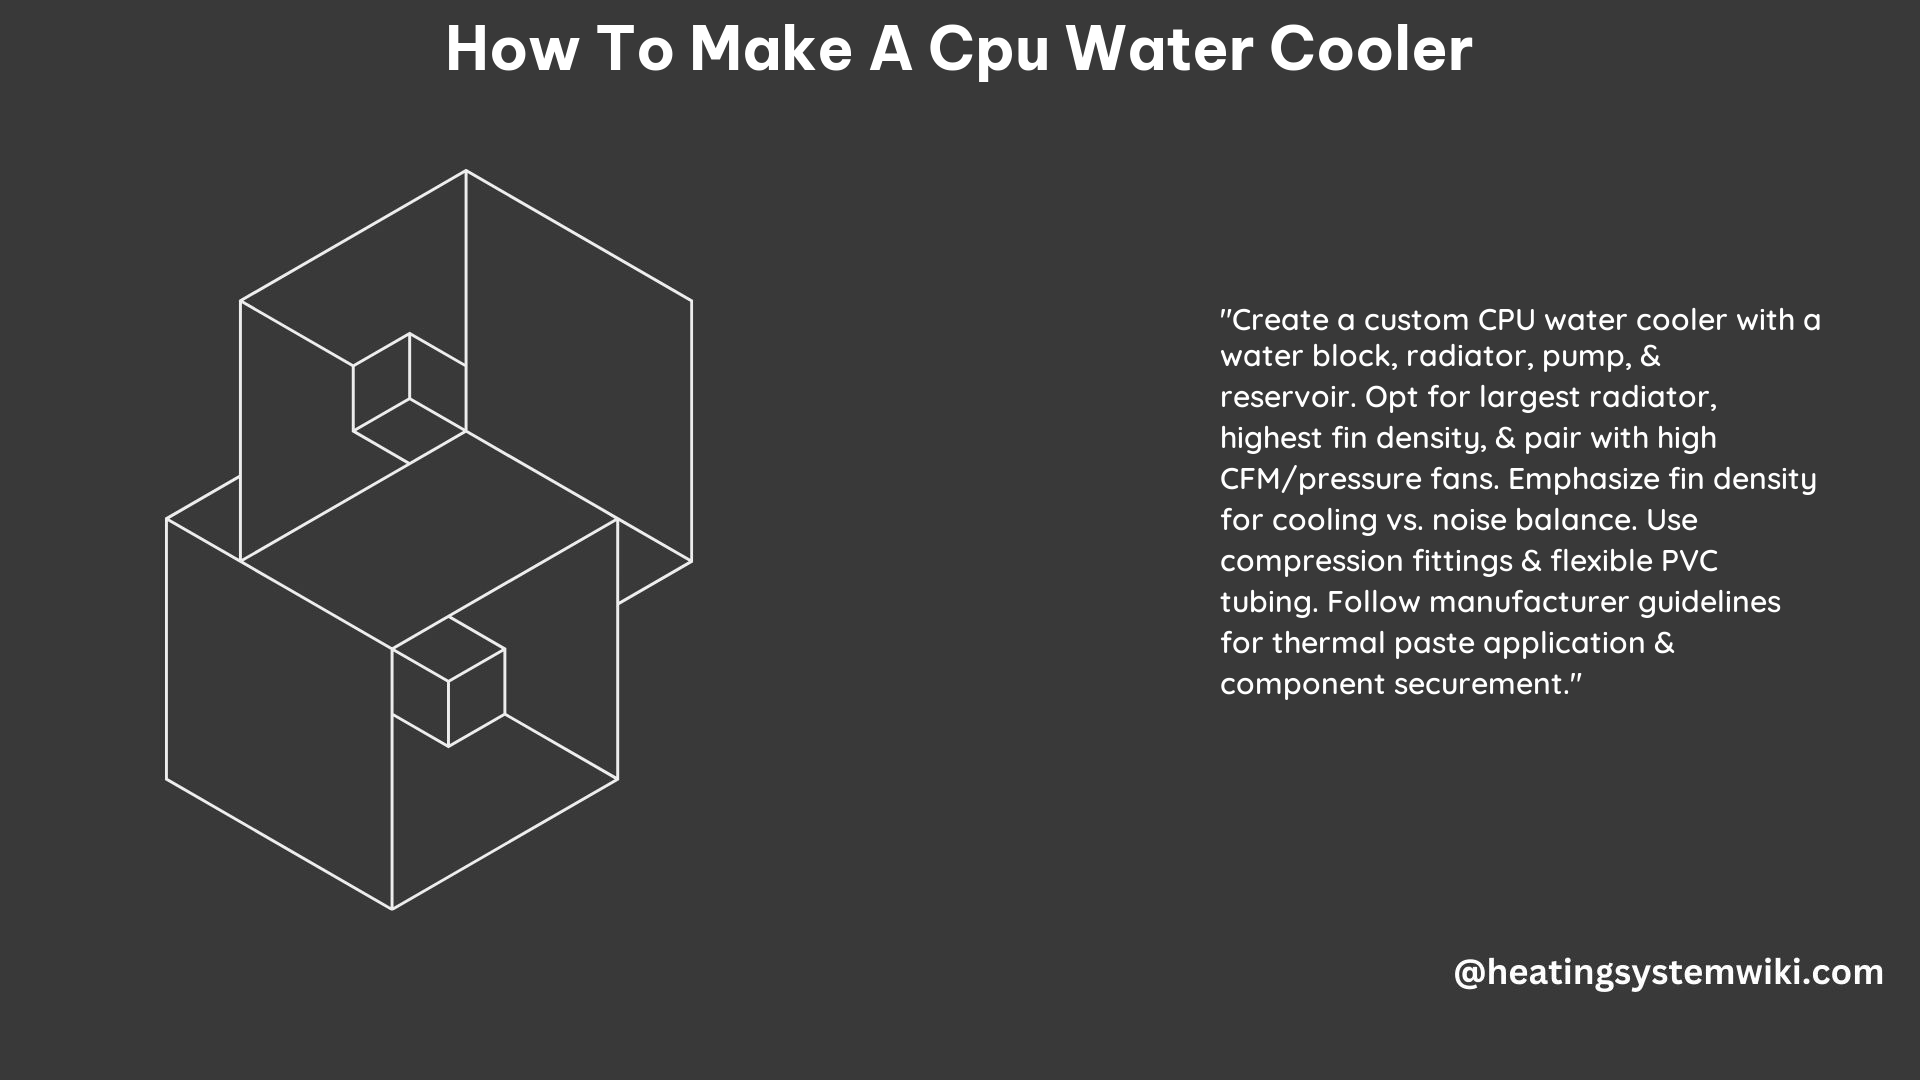 How to Make a CPU Water Cooler